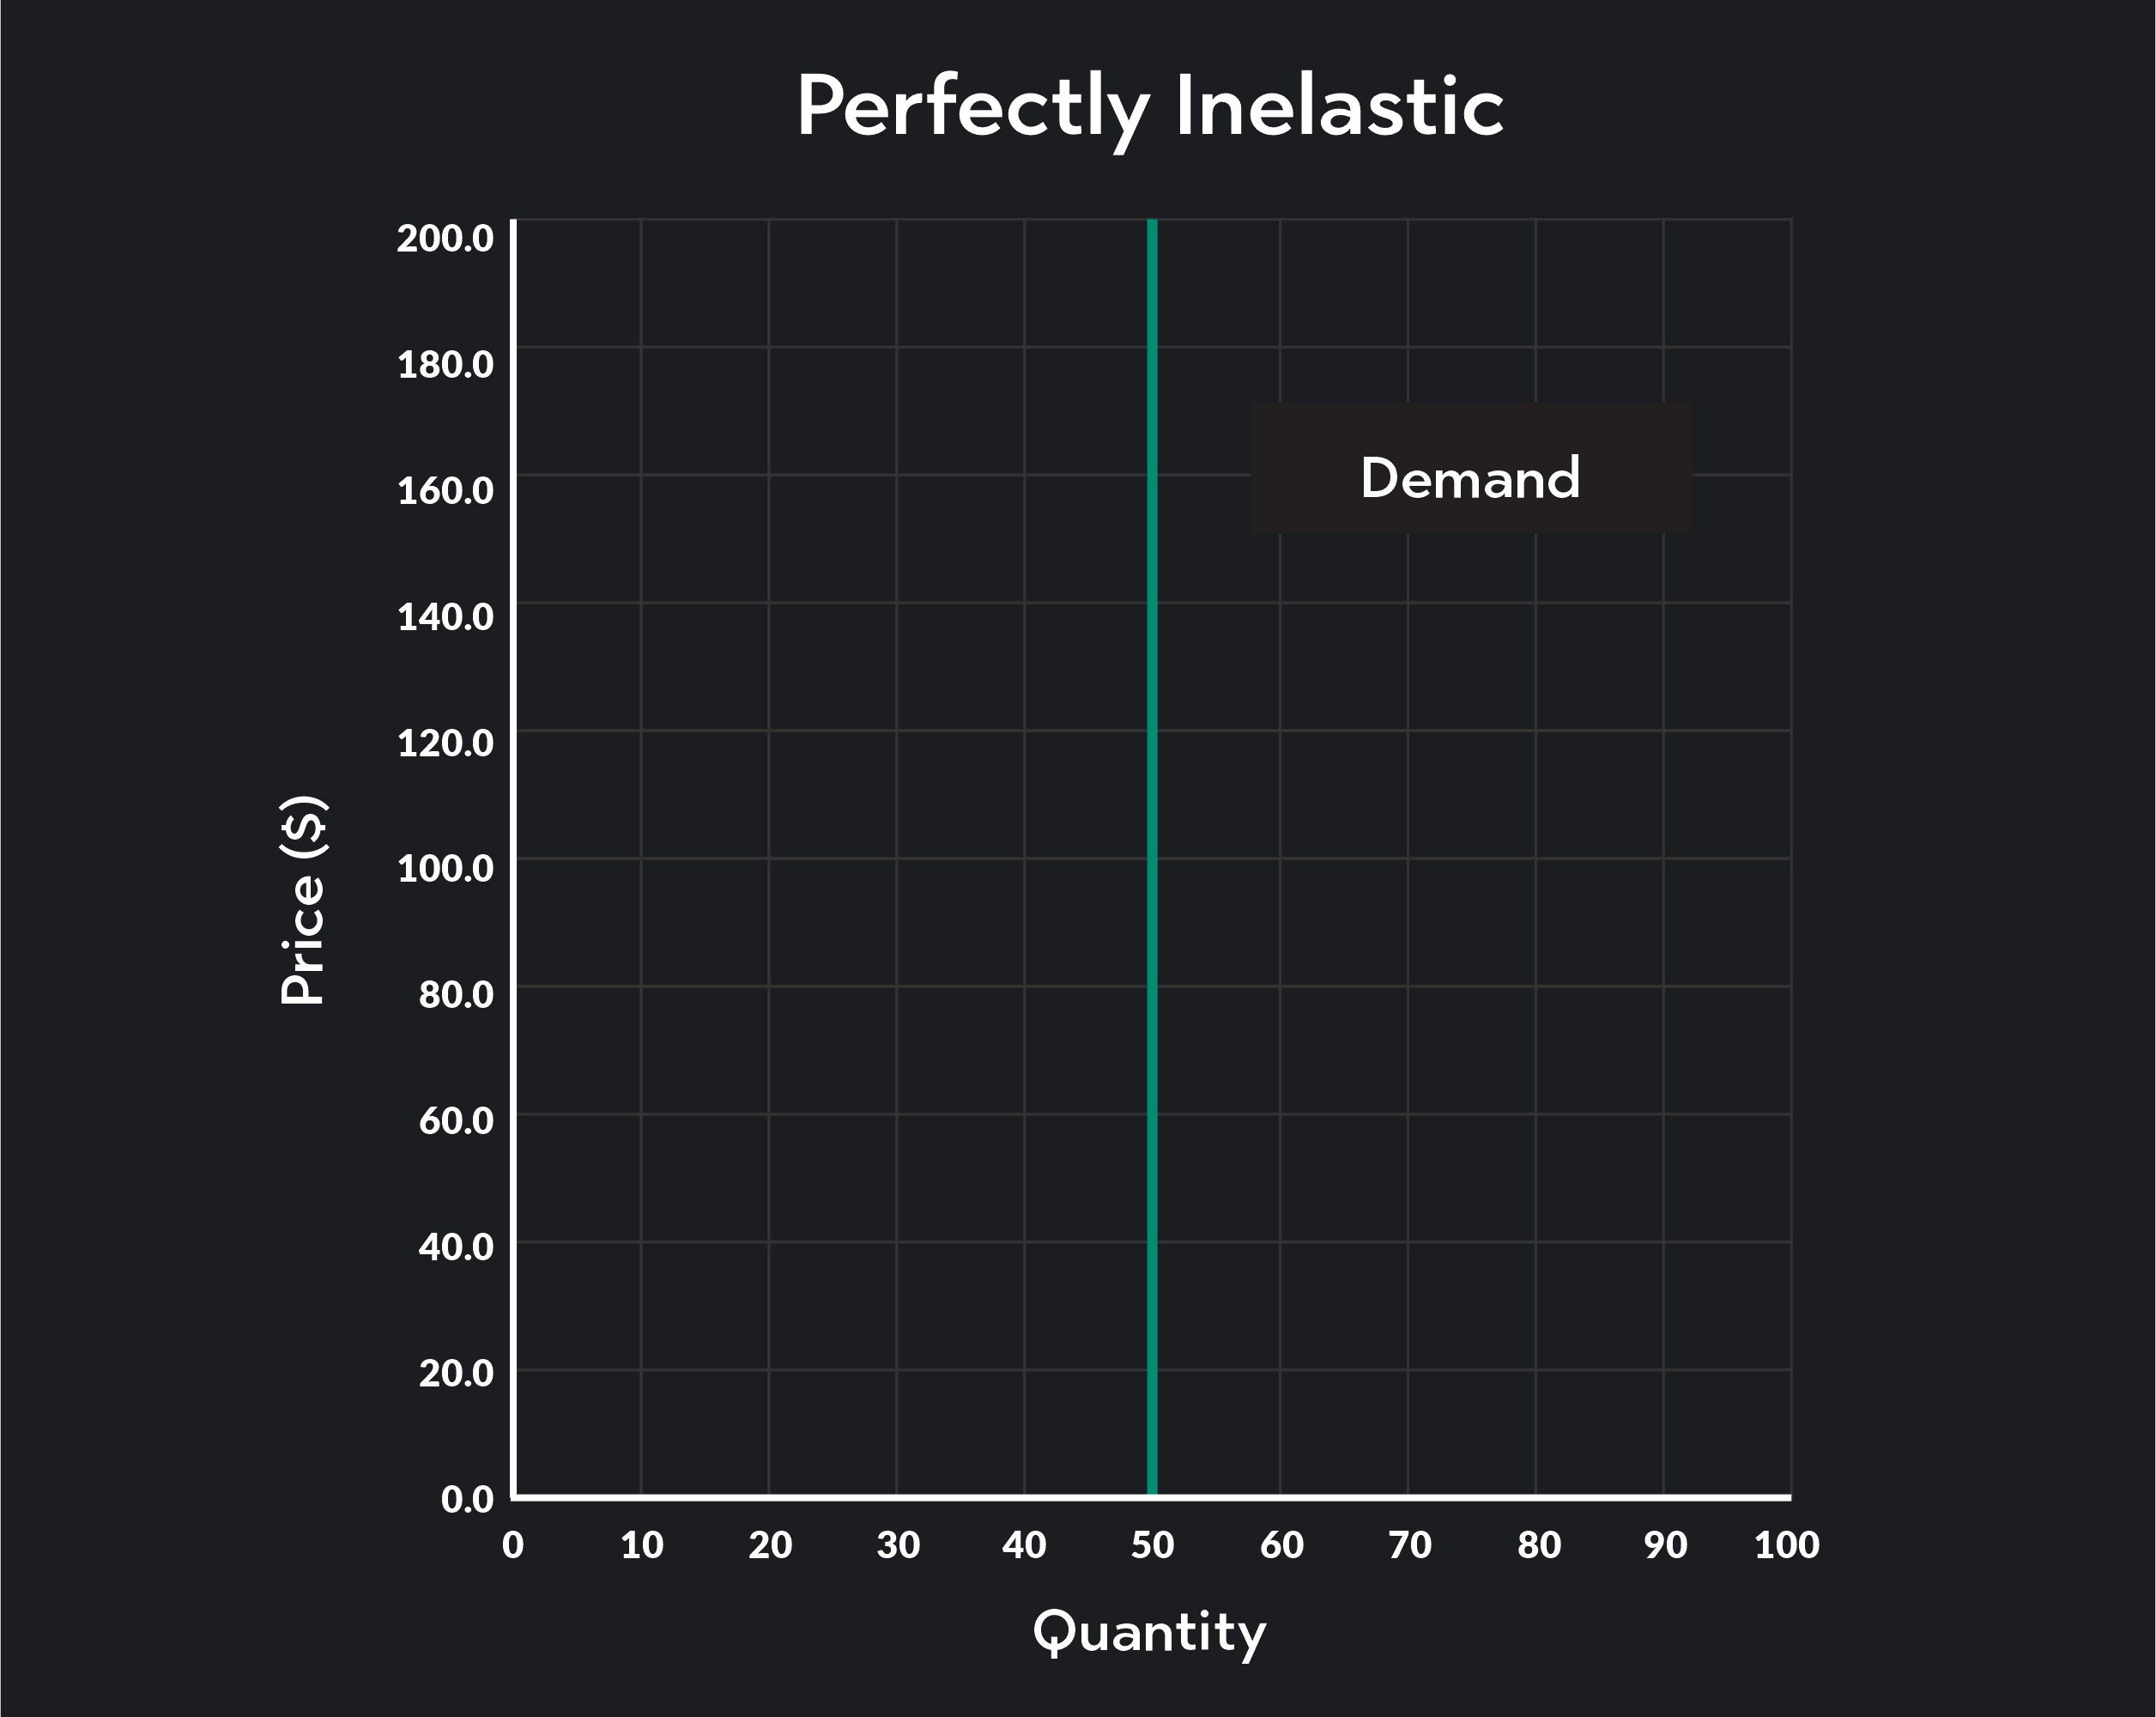 This graph shows how a perfectly inelastic demand curve will be a vertical line. The straight vertical demand curve indicates that the quantity demanded remains unchanged no matter the different prices.